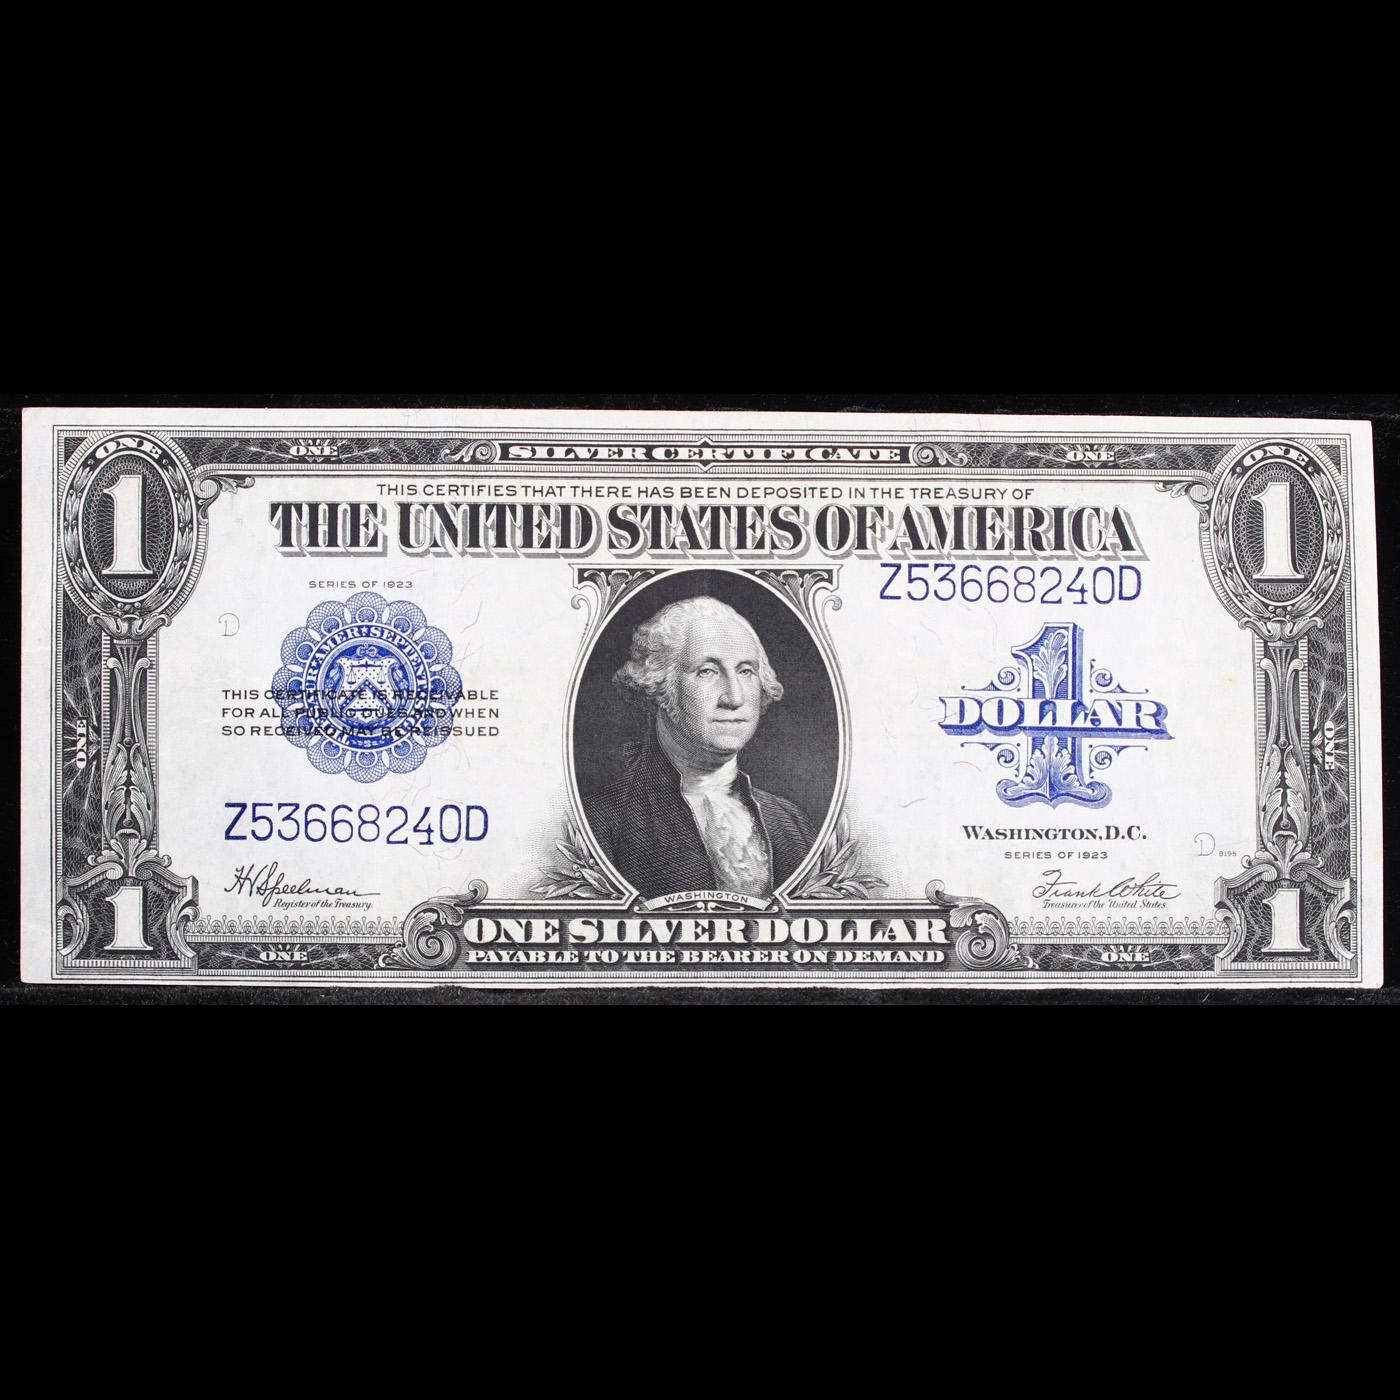 1923 $1 large size Blue Seal Silver Certificate, Fr-237 Signatures of Speelman & White Grades Select